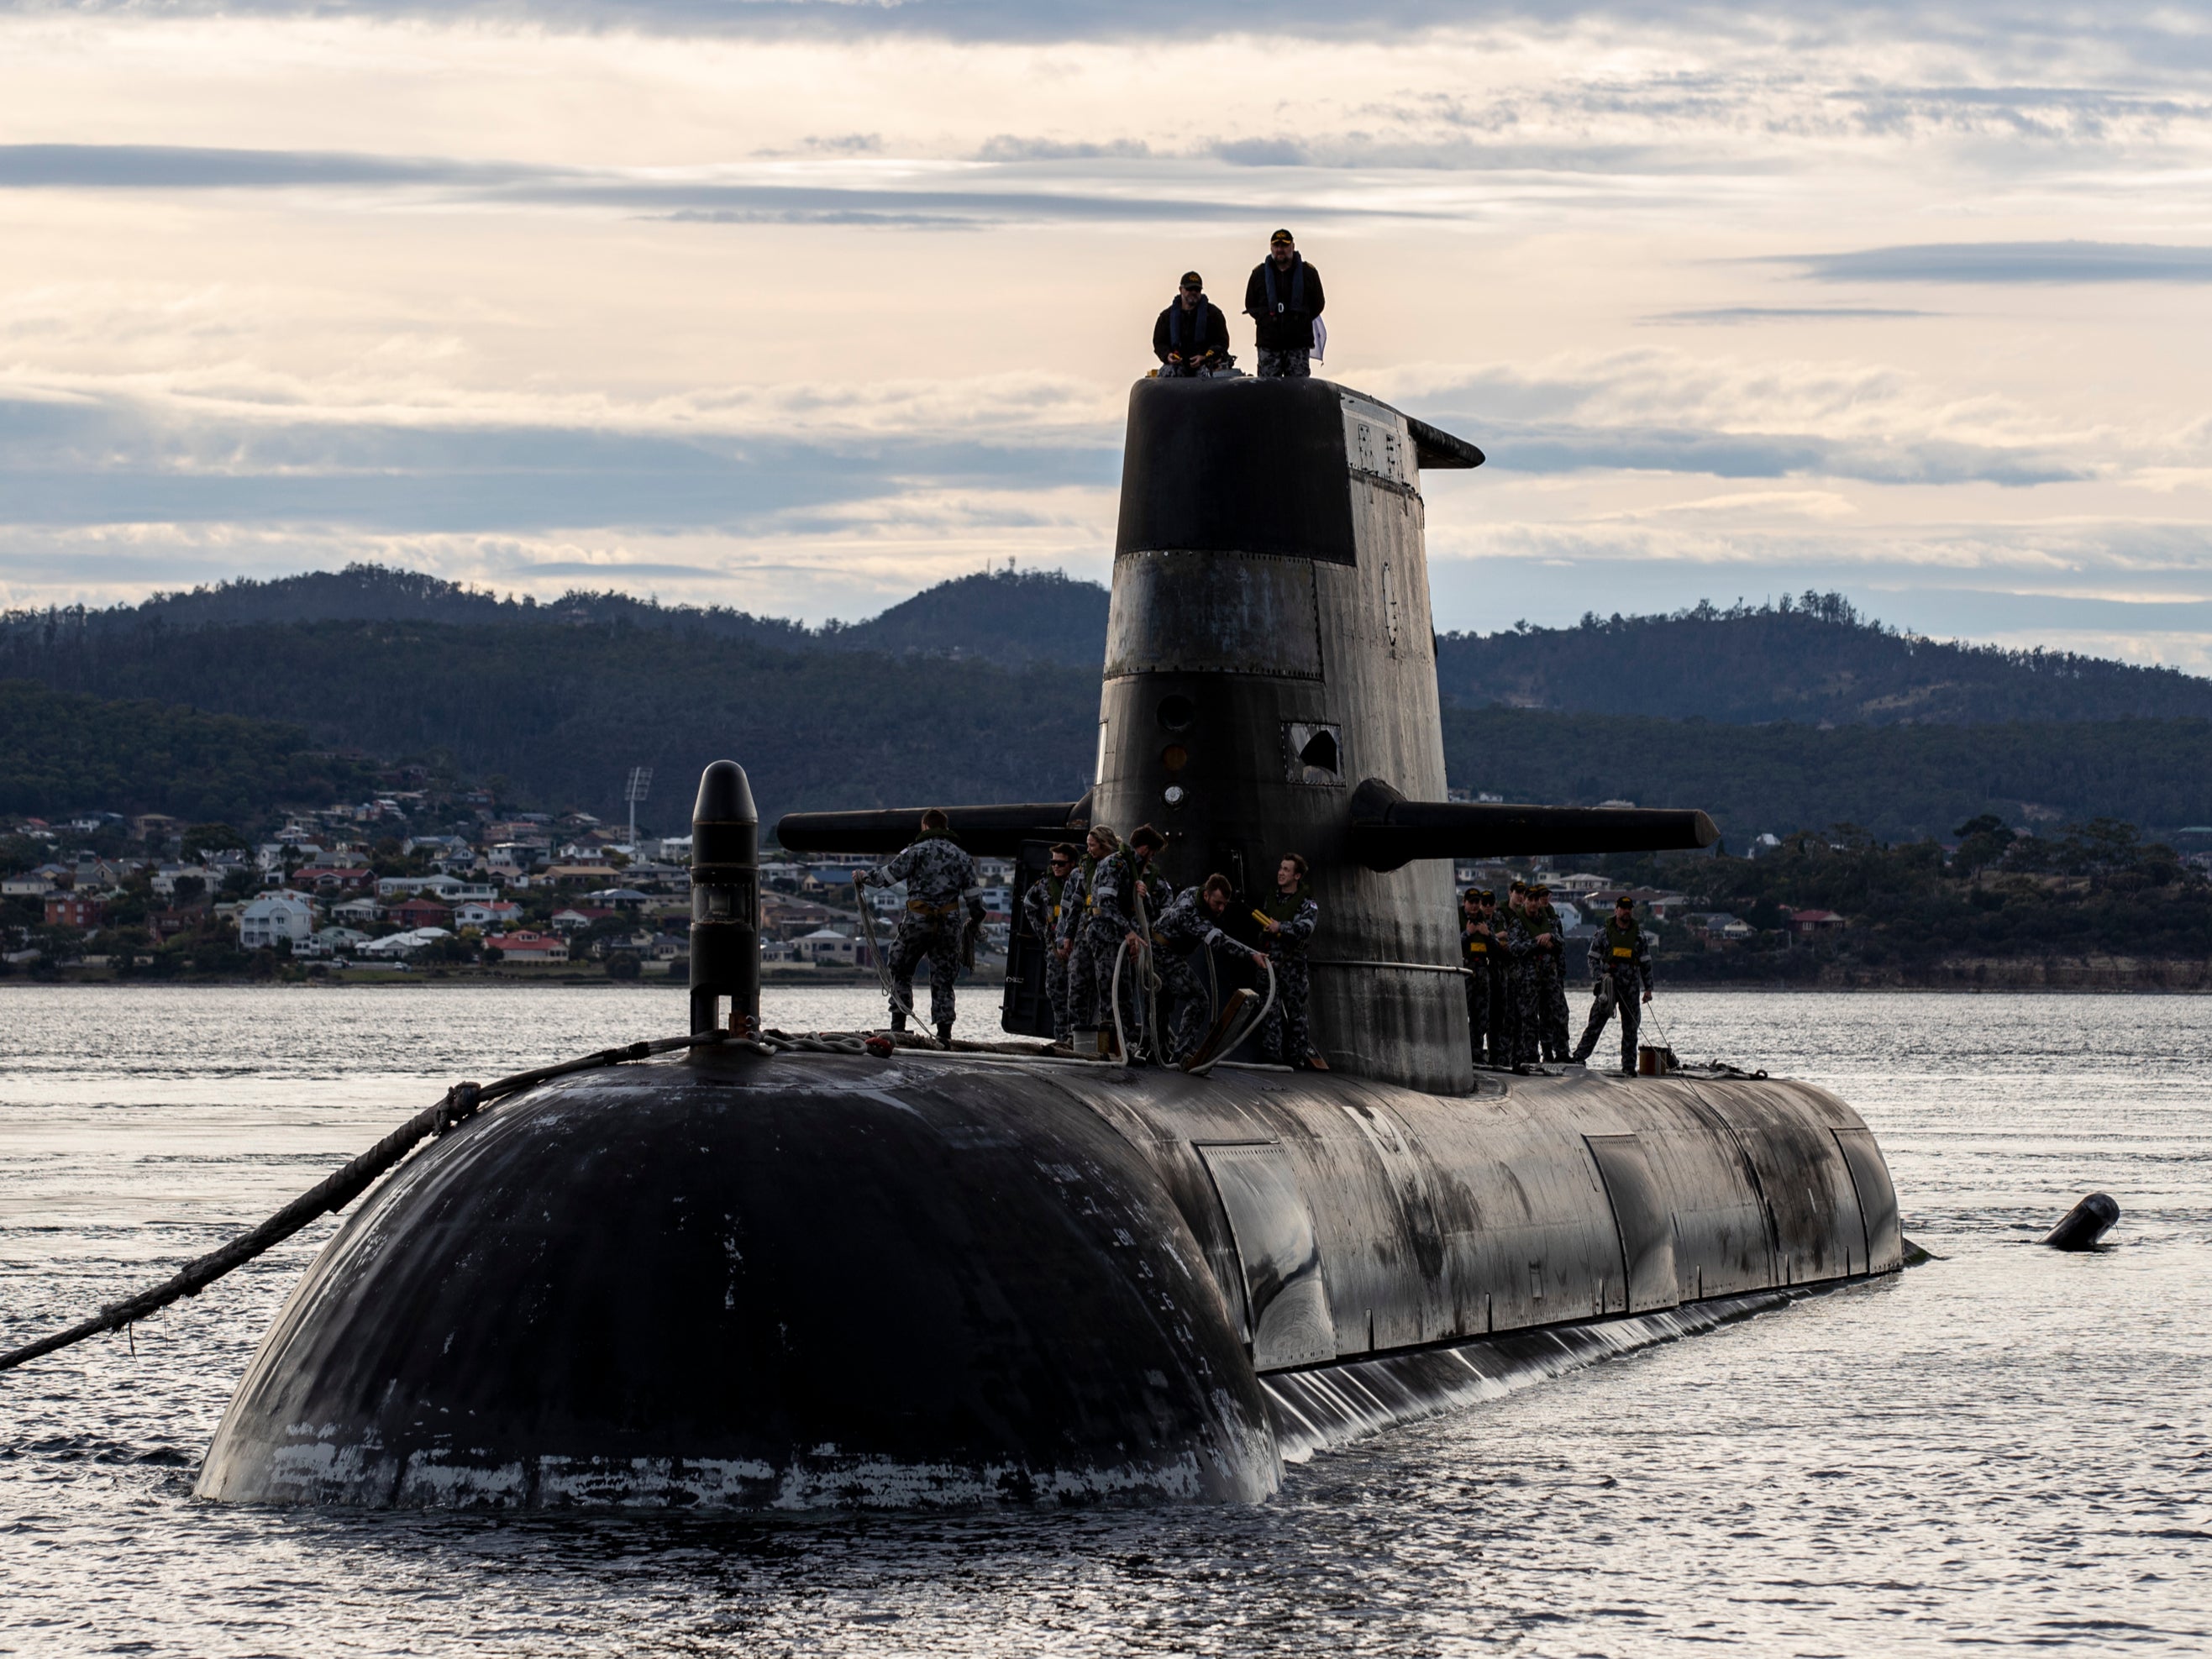 The Aukus deal between the US and UK to supply nuclear submarines to Australia was announced seemingly out of the blue last month